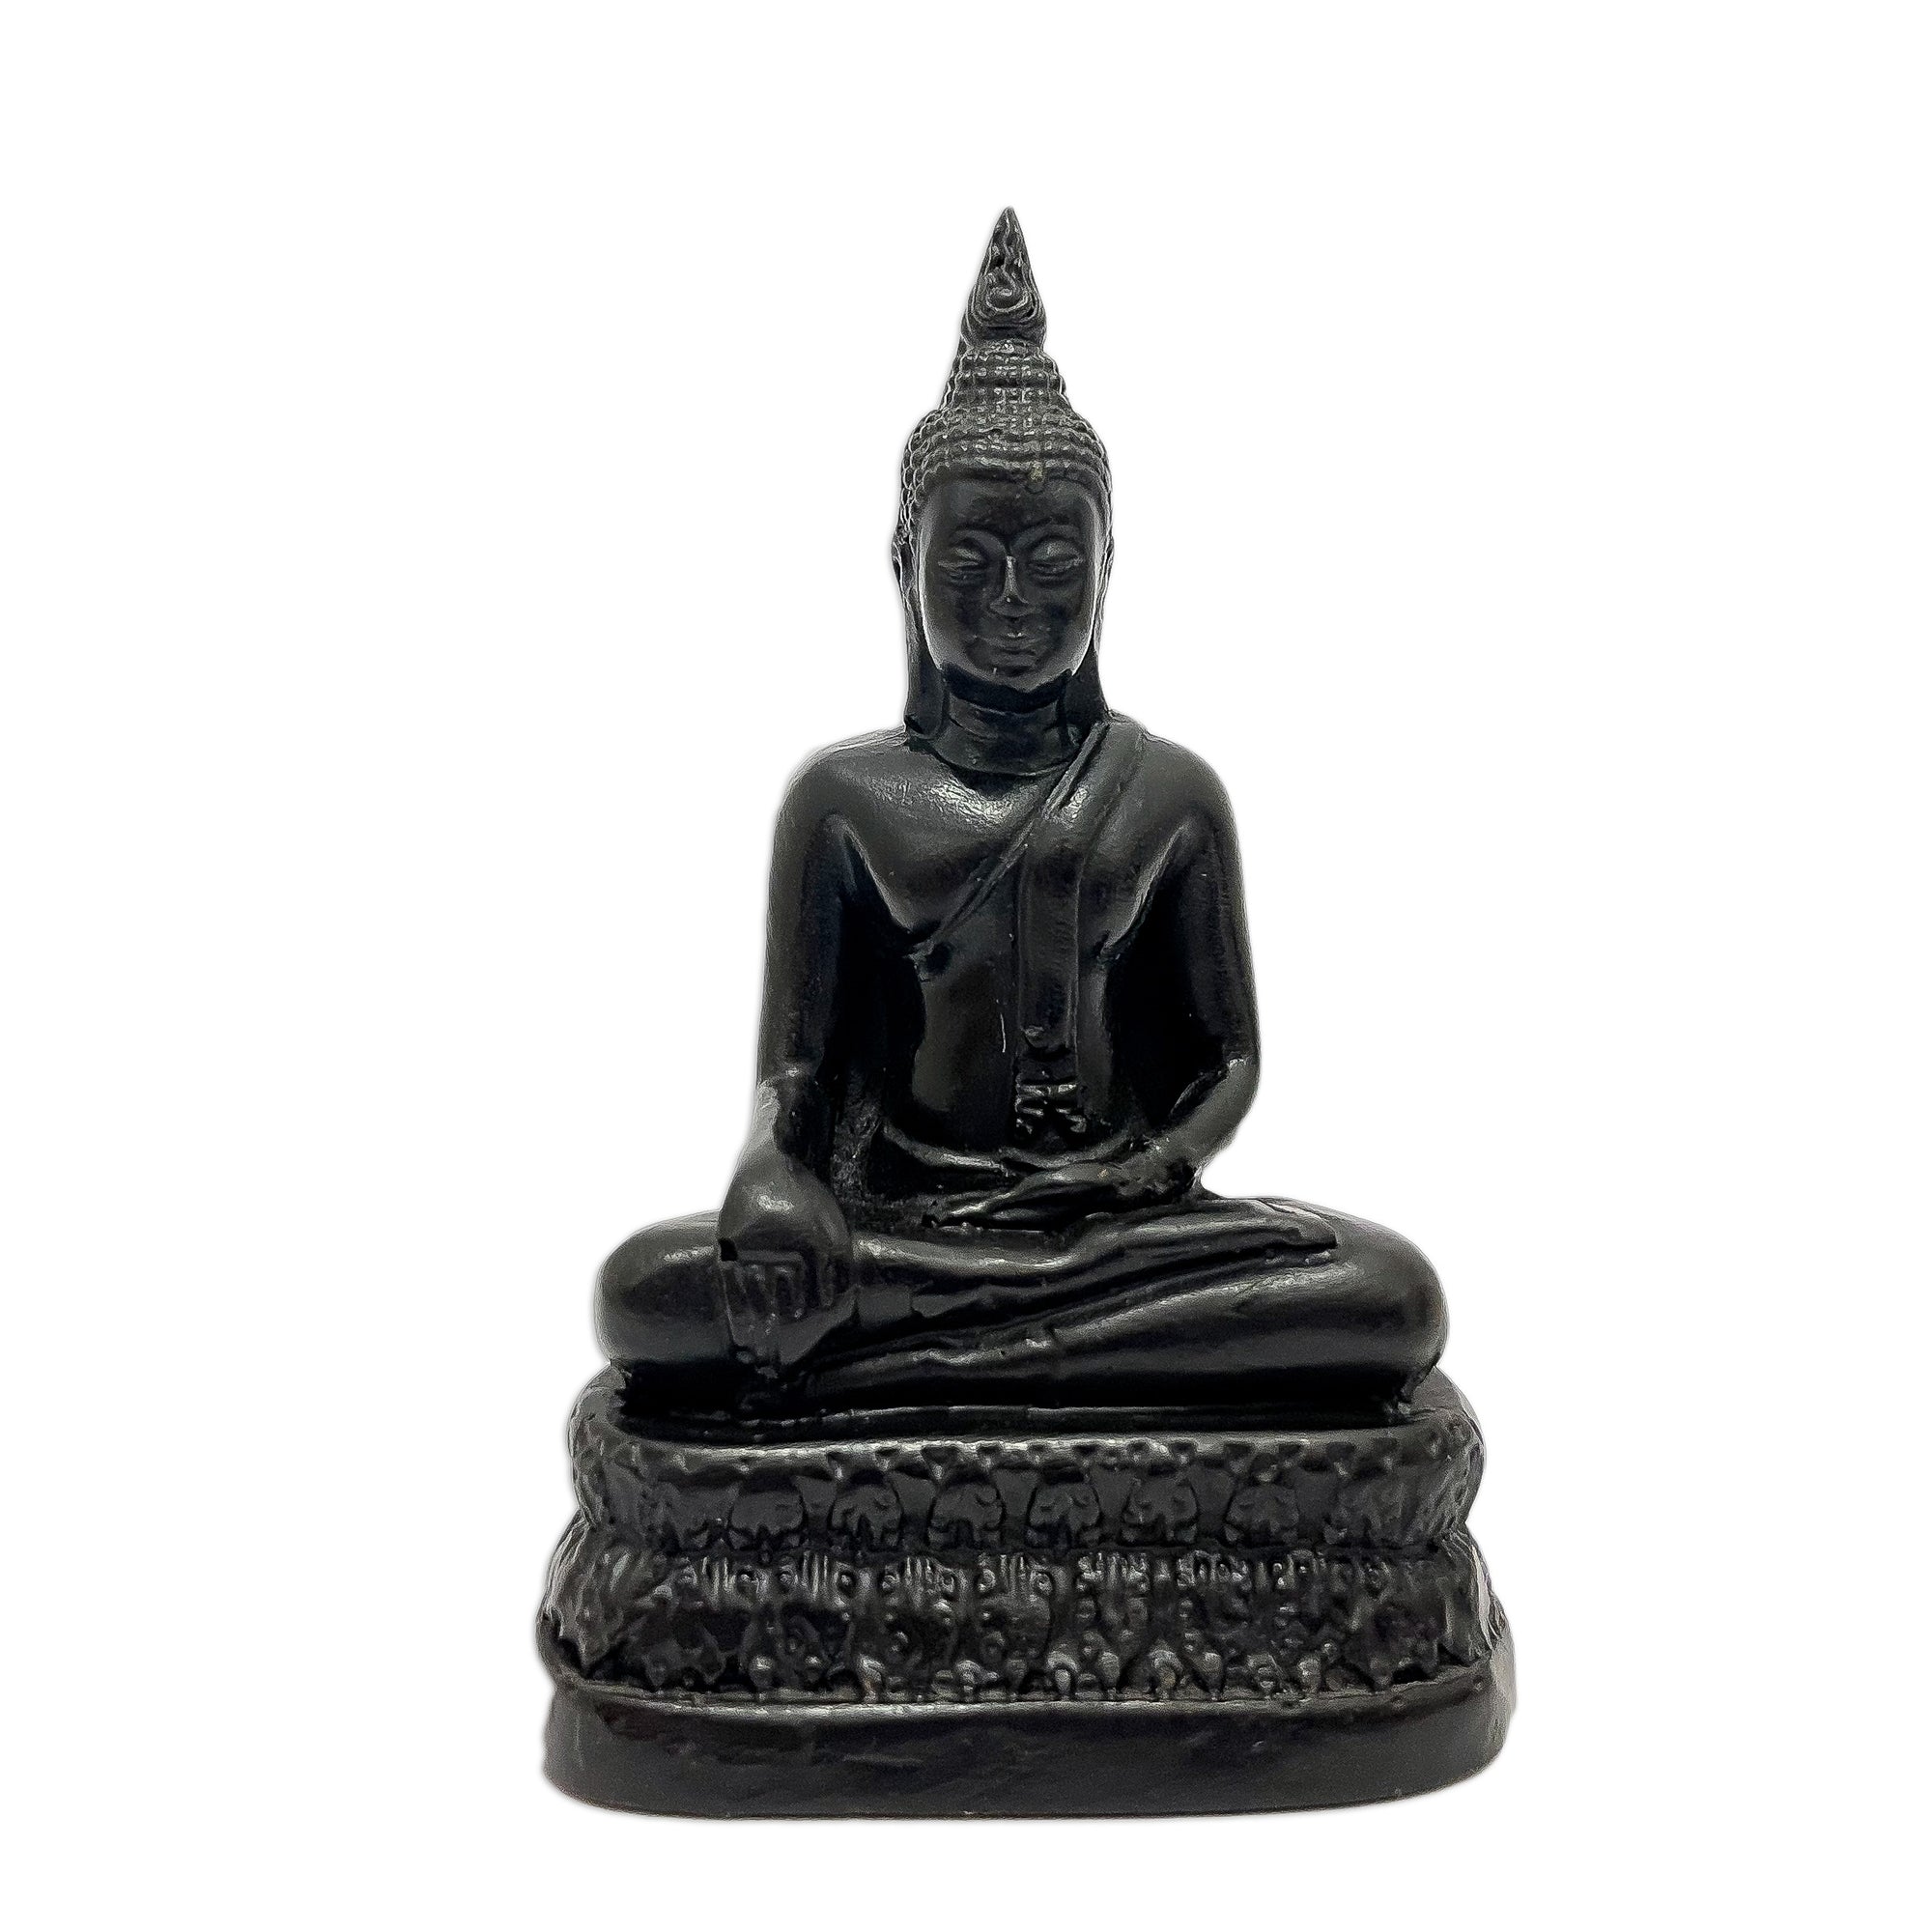 Cast Black Resin Earth Touching Buddha Statuettes